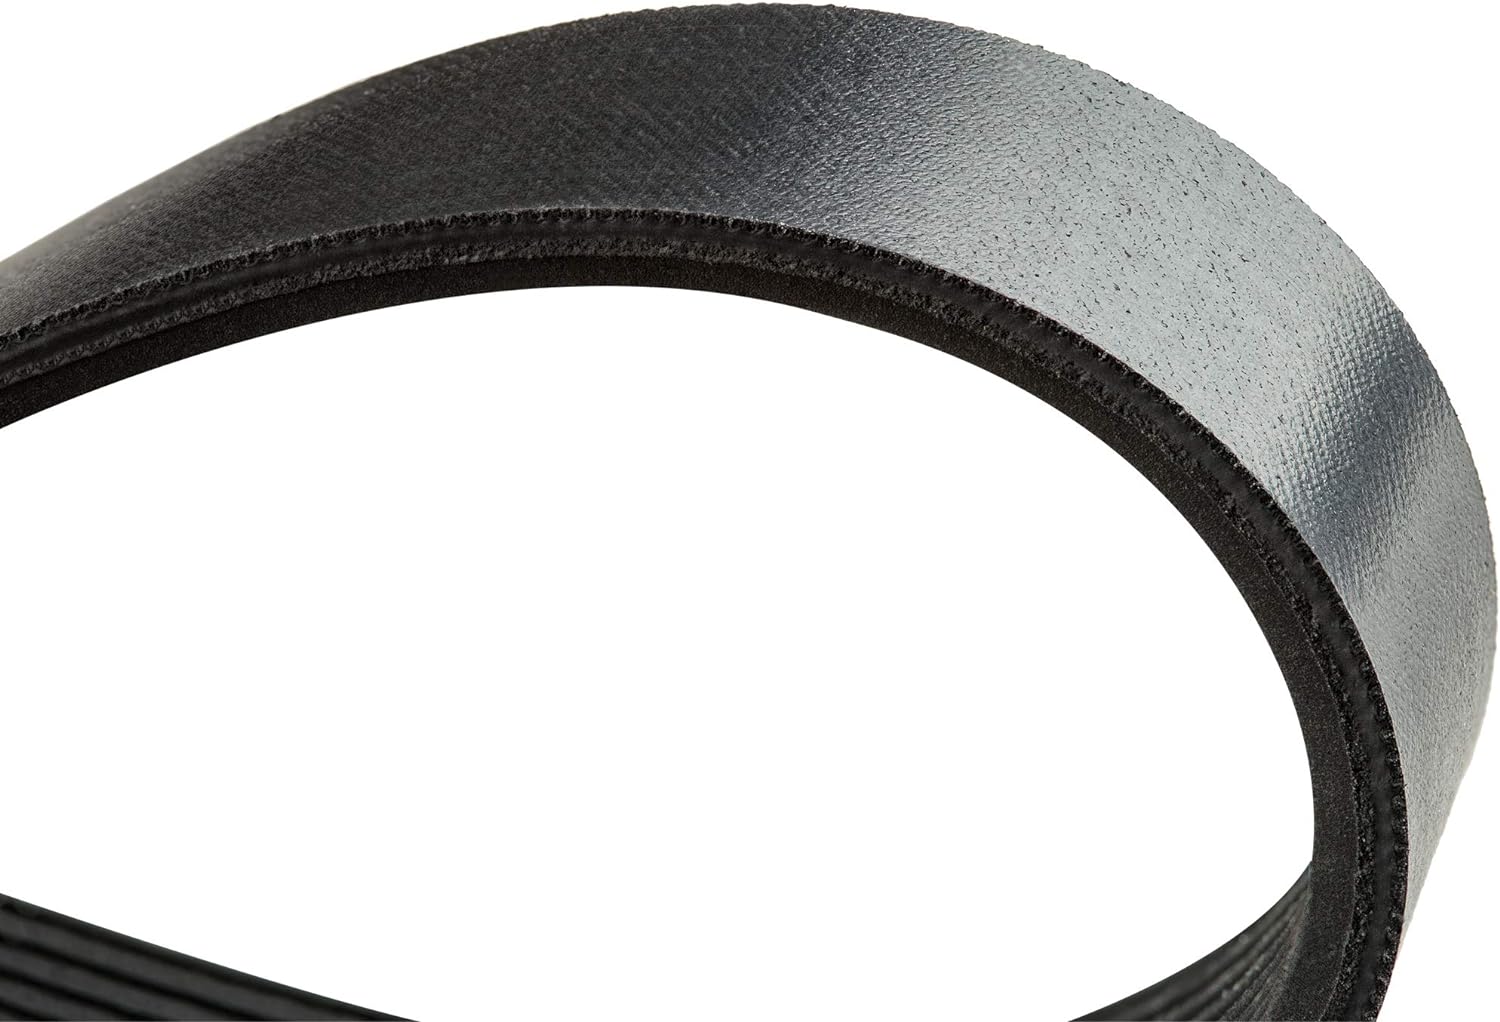 Bandsaw tire warehouse Drive Belt For - SEARS CRAFTSMAN BAND SAW PART NUMBER 29502 - High Strength Rubber Belt